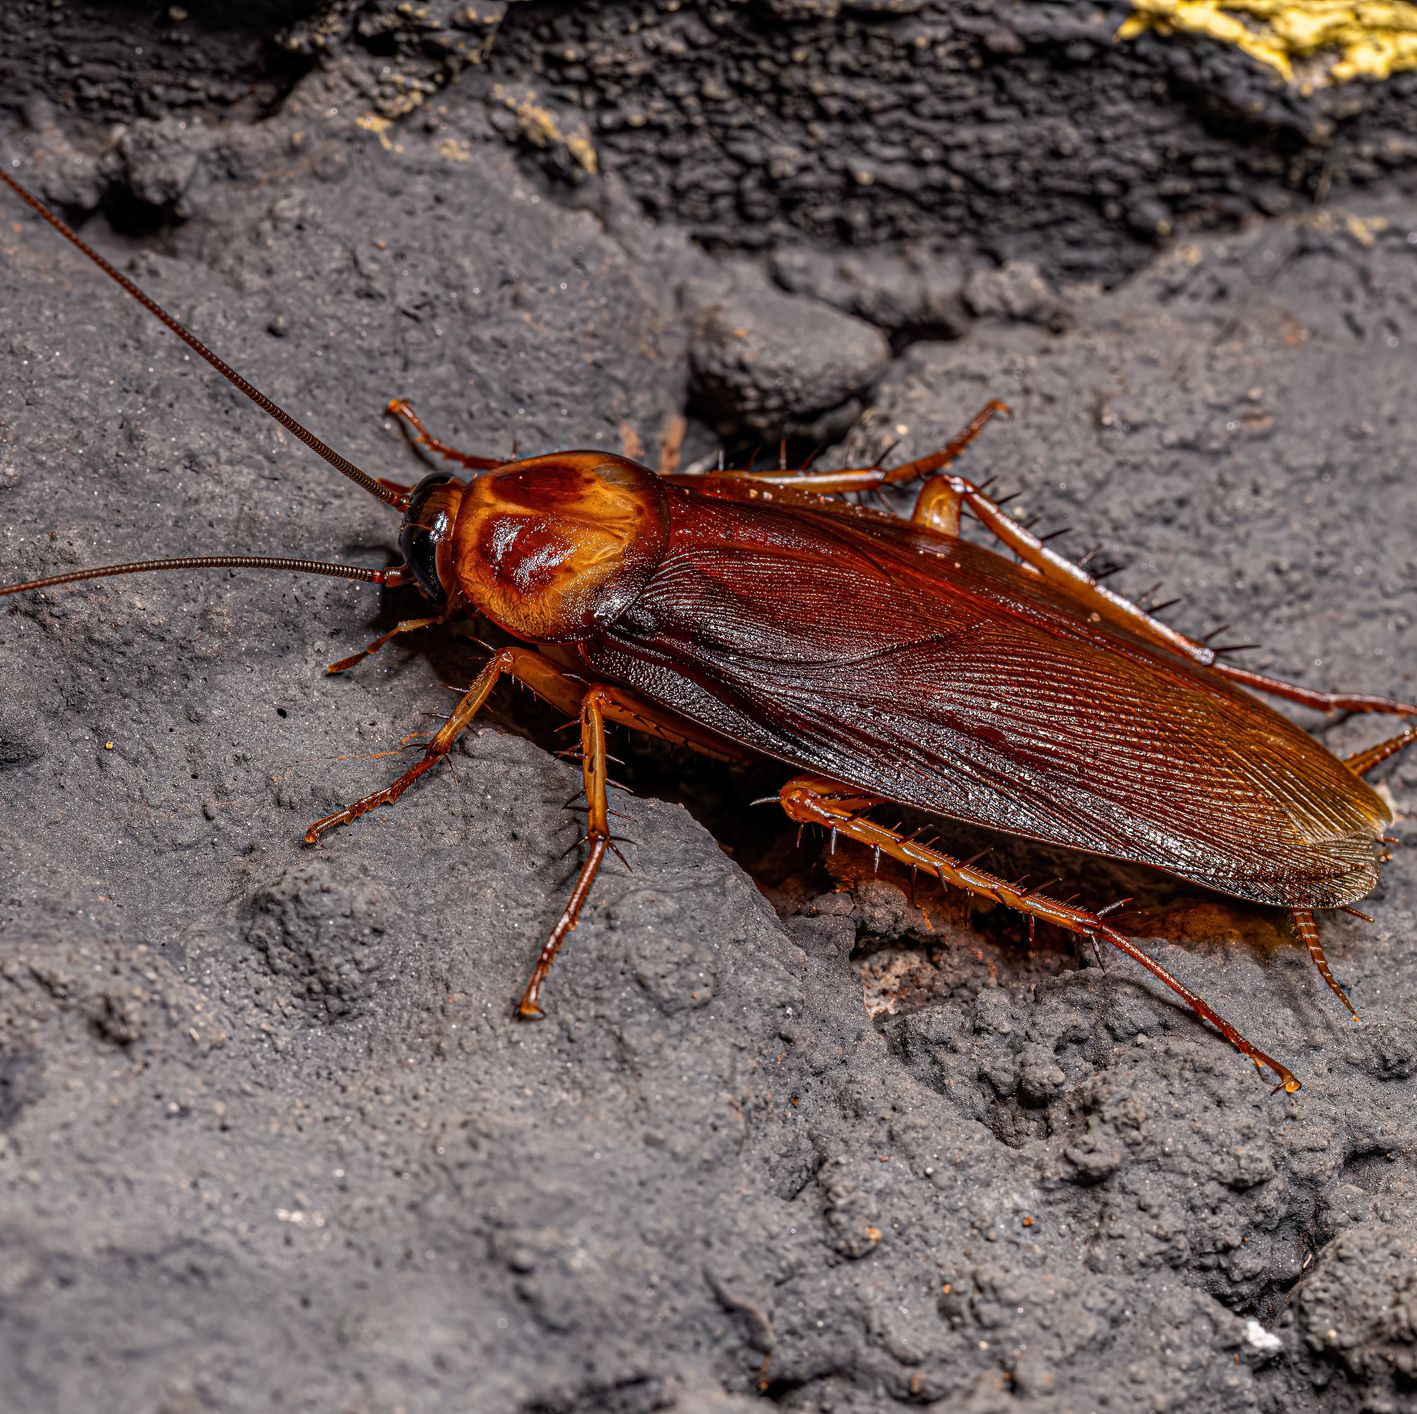 How Severed Cockroach Legs Could Help Us 'Fully Rebuild' Human Bodies